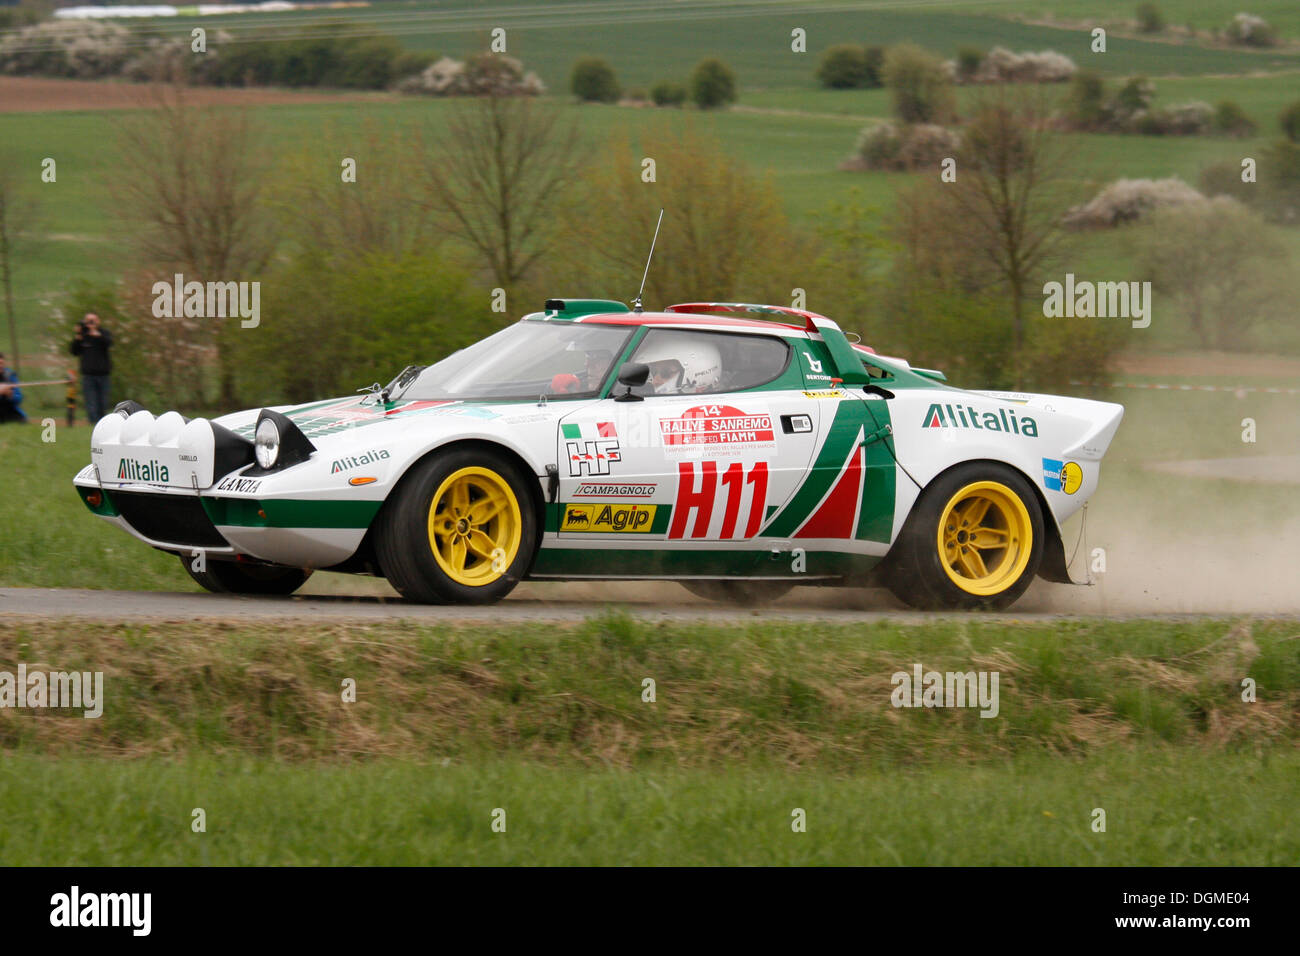 Lancia Stratos, built in 1976, legendary rally car during the German Rally Championship, Rallye Vogelsberg 2011, Hesse Stock Photo